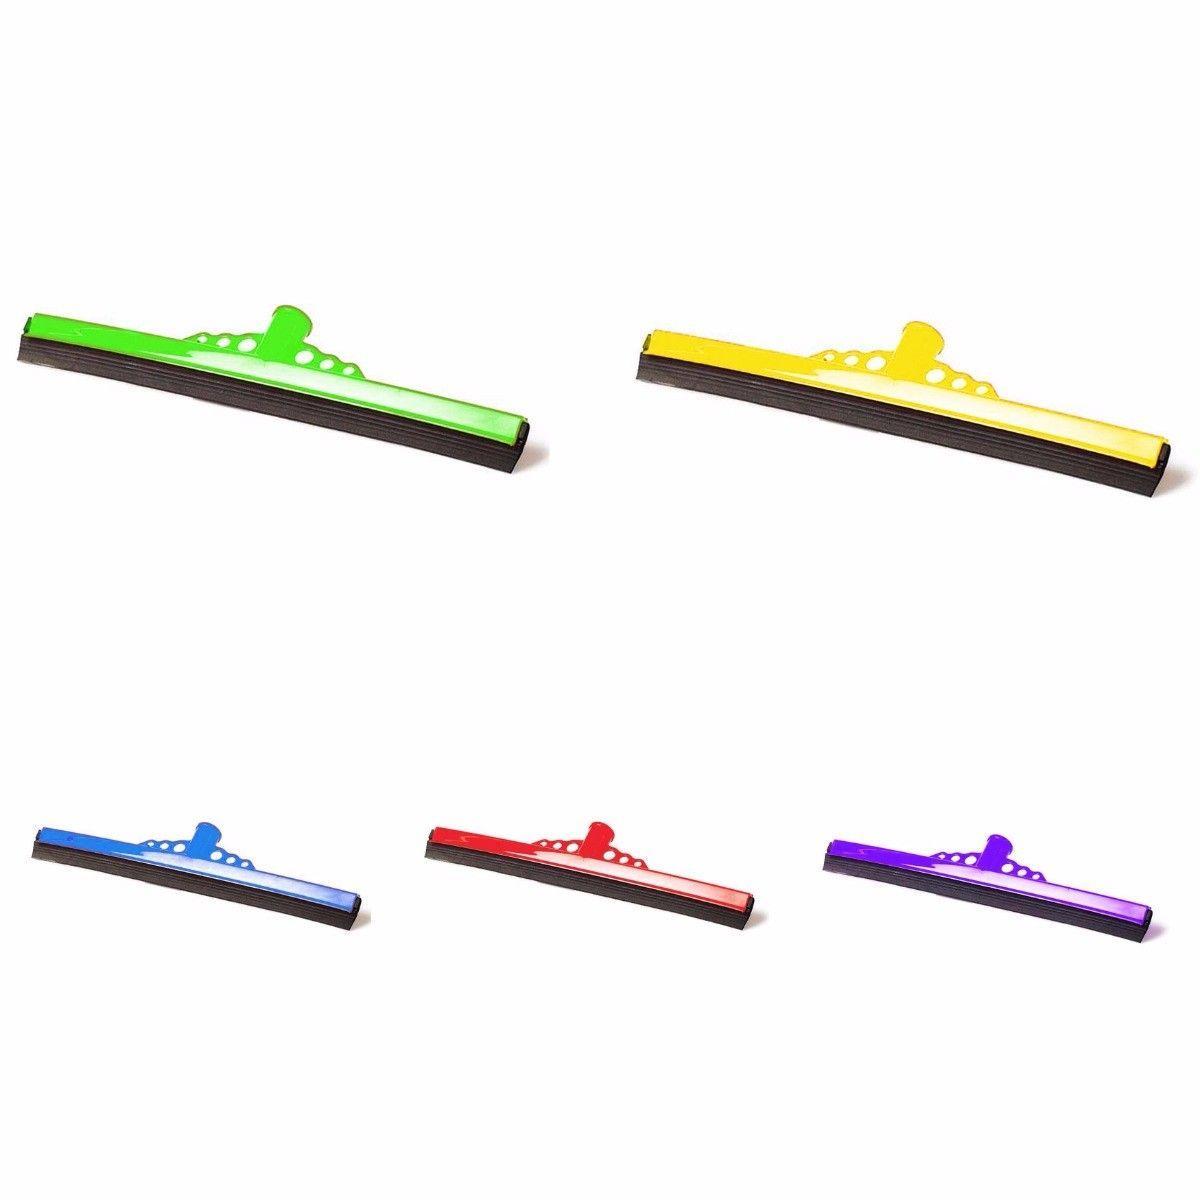 Assorted Colour Water Wiper Efficient Durable High Quality 37cm 1955 (Parcel Rate)